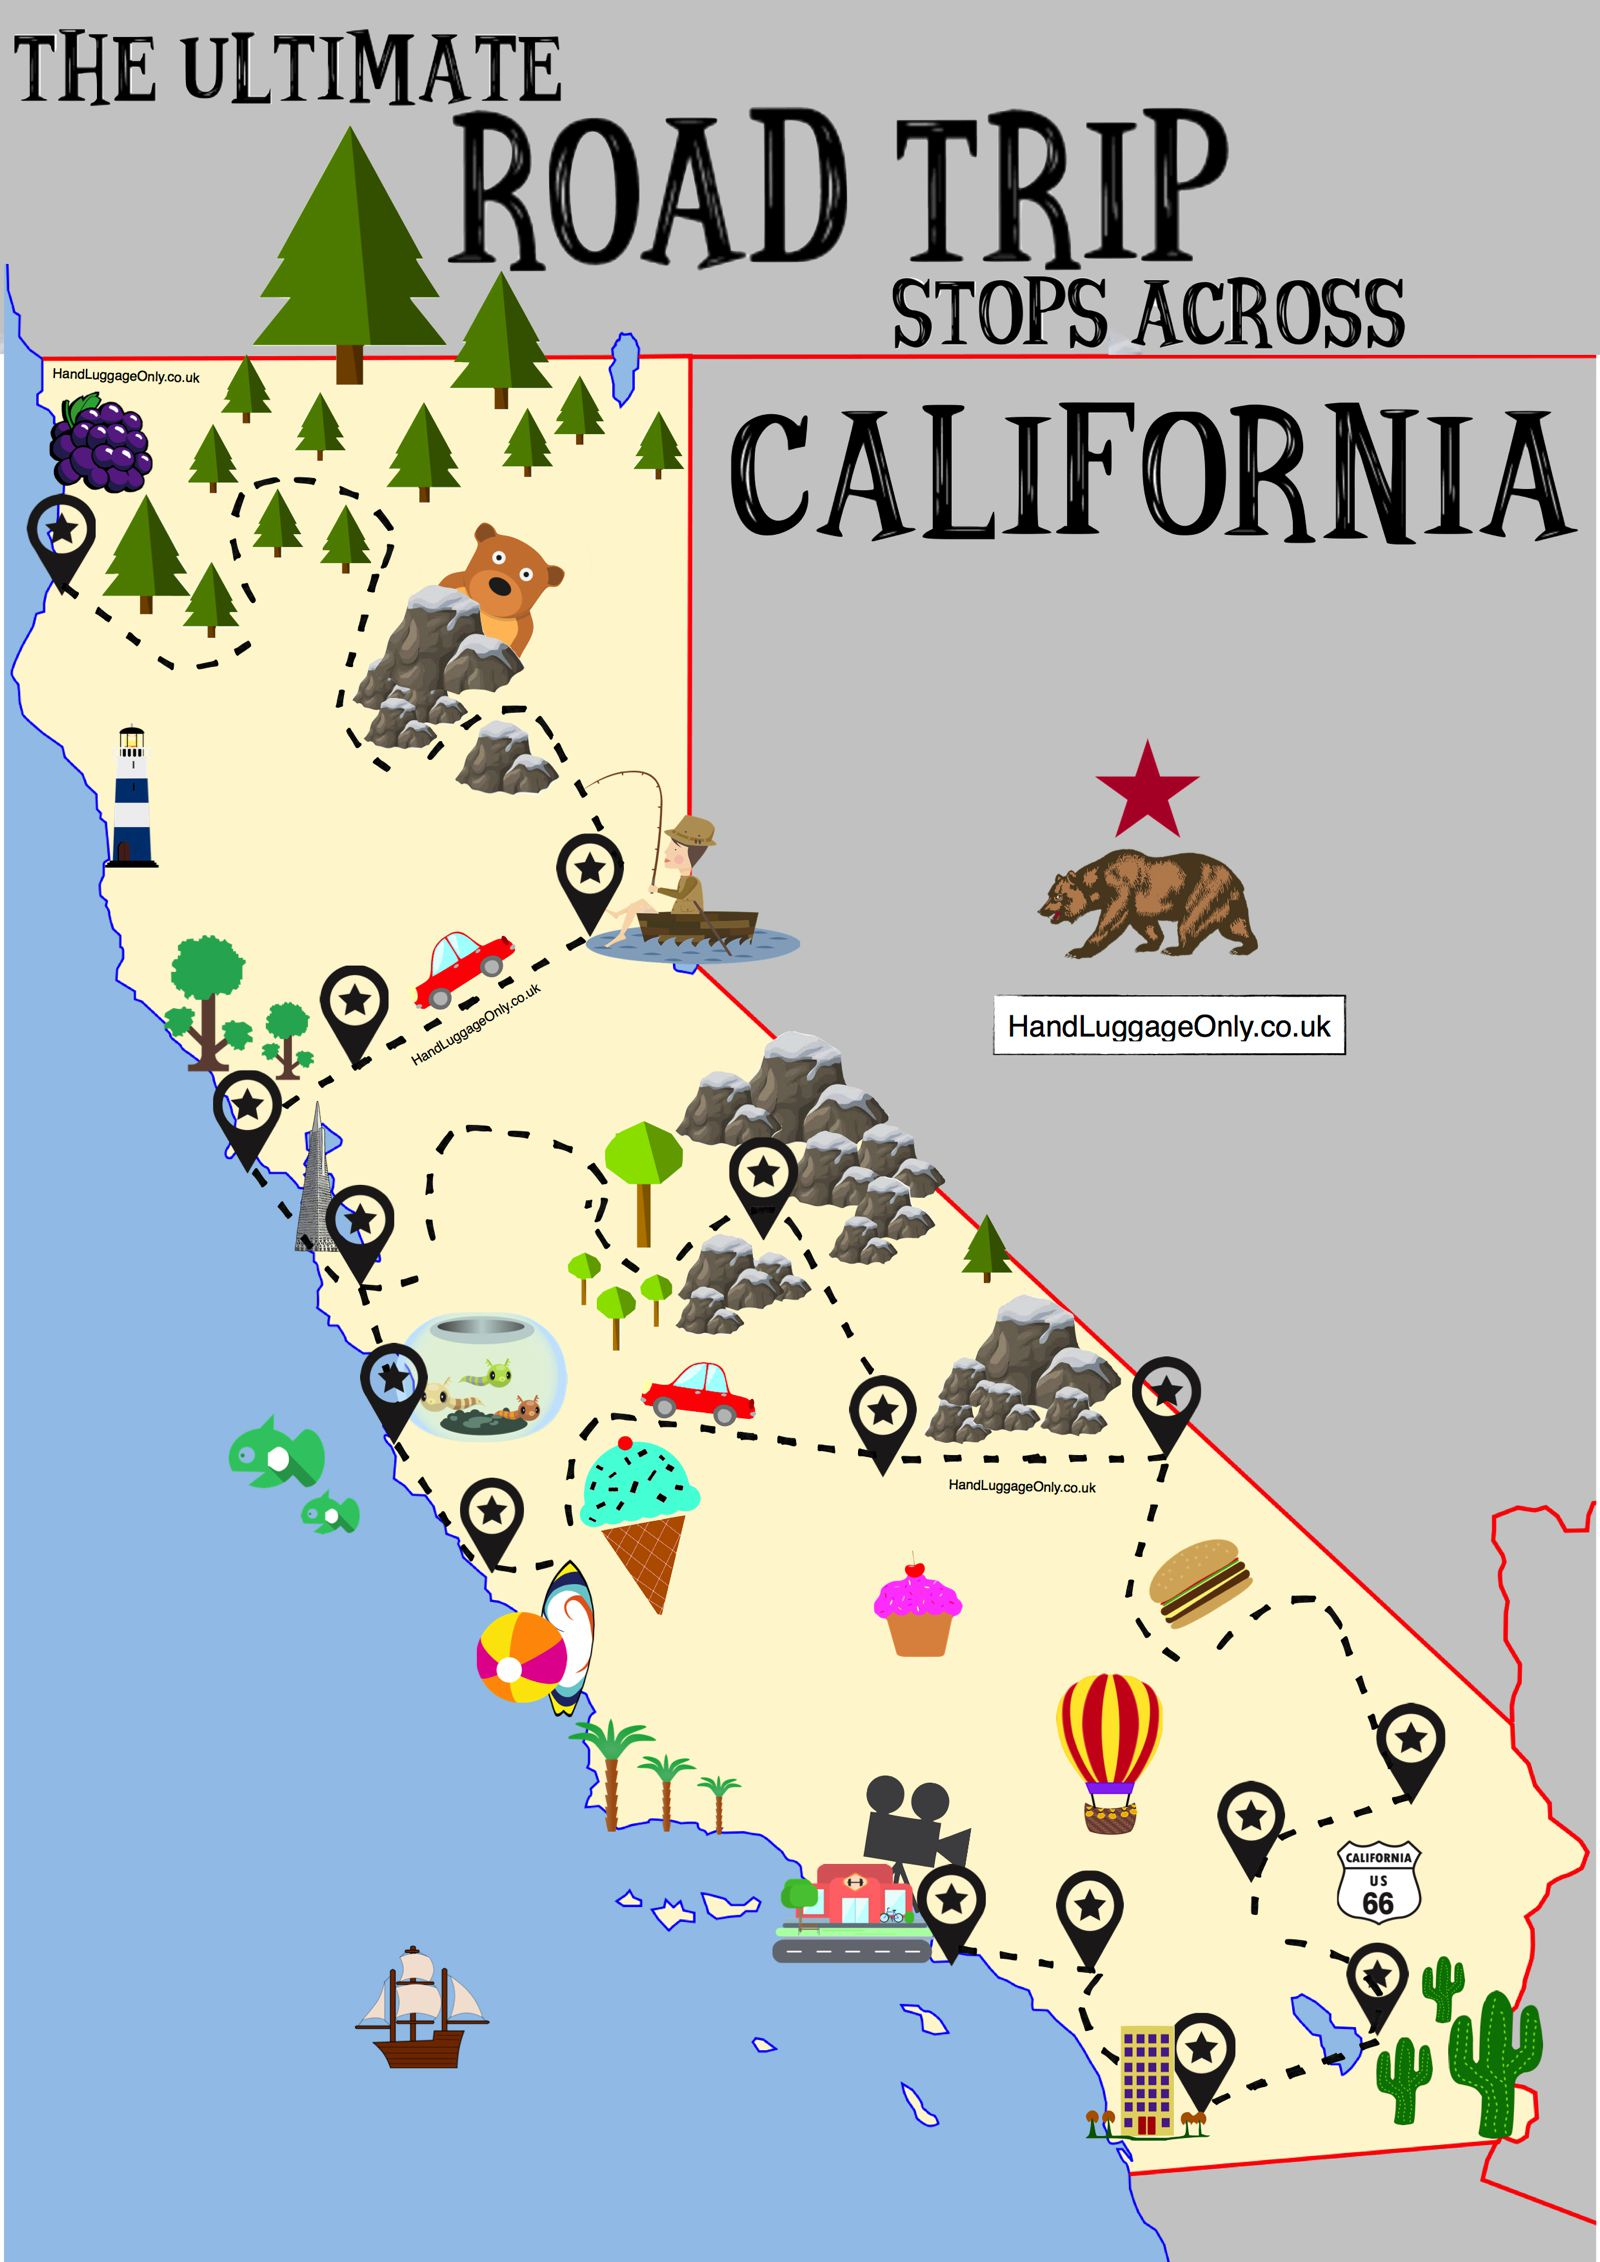 The Ultimate Road Trip Map Of Places To Visit In California - Hand - California Pictures Map